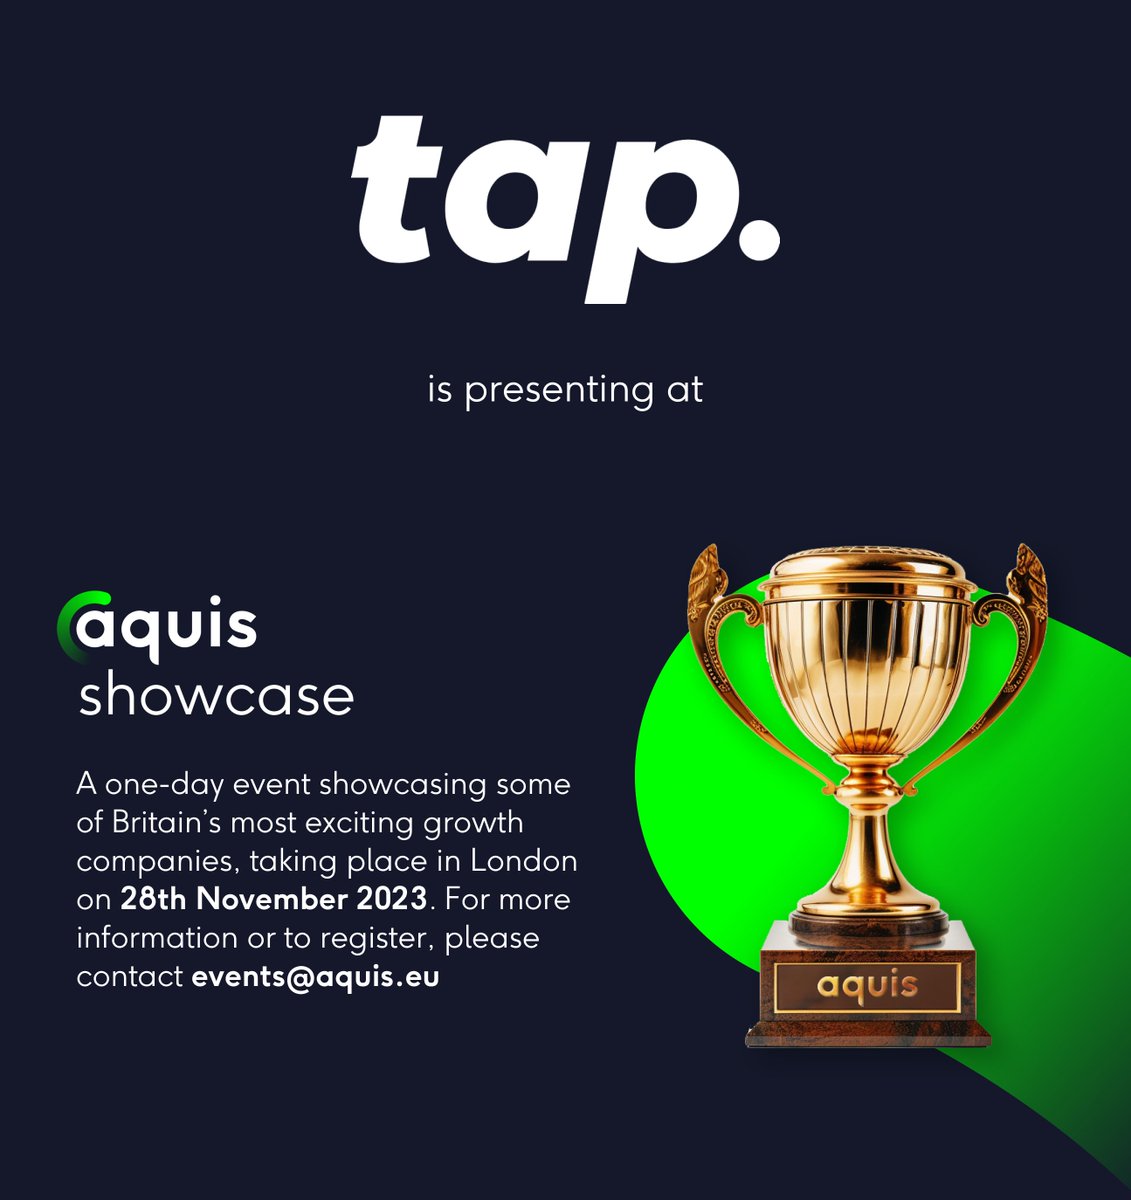 #Tap is looking forward to presenting to investors, including financial journalists and fund managers, at the @AquisStockEx showcase event on 28th November. Tickets available here: eventbrite.co.uk/e/the-aquis-sh….